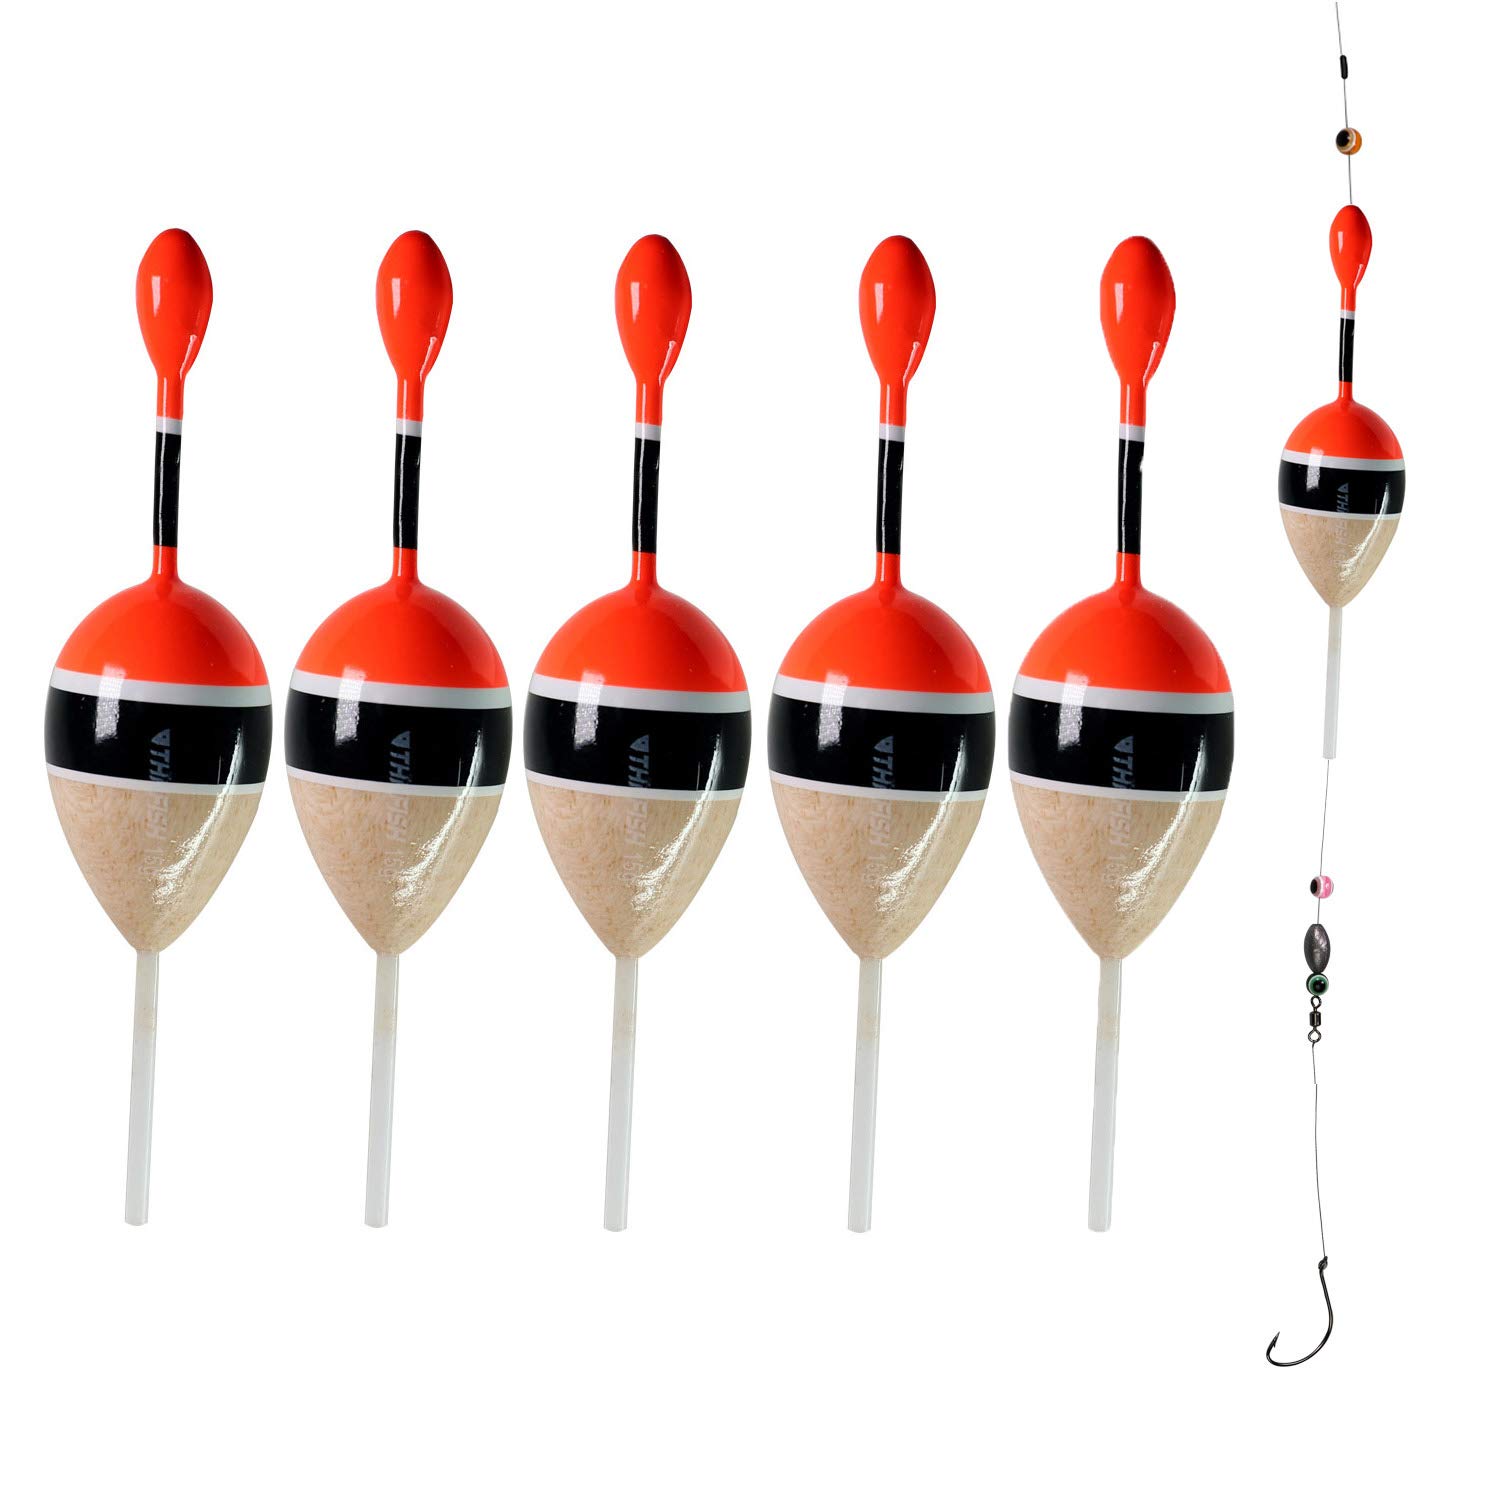 THKFISH Fishing Floats and Bobbers Balsa Wood Floats Spring Bobbers Oval  Stick Floats Slip Bobbers for Crappie Panfish Walleyes 2X1.14X5.86 5pcs,  Corks, Floats & Bobbers -  Canada